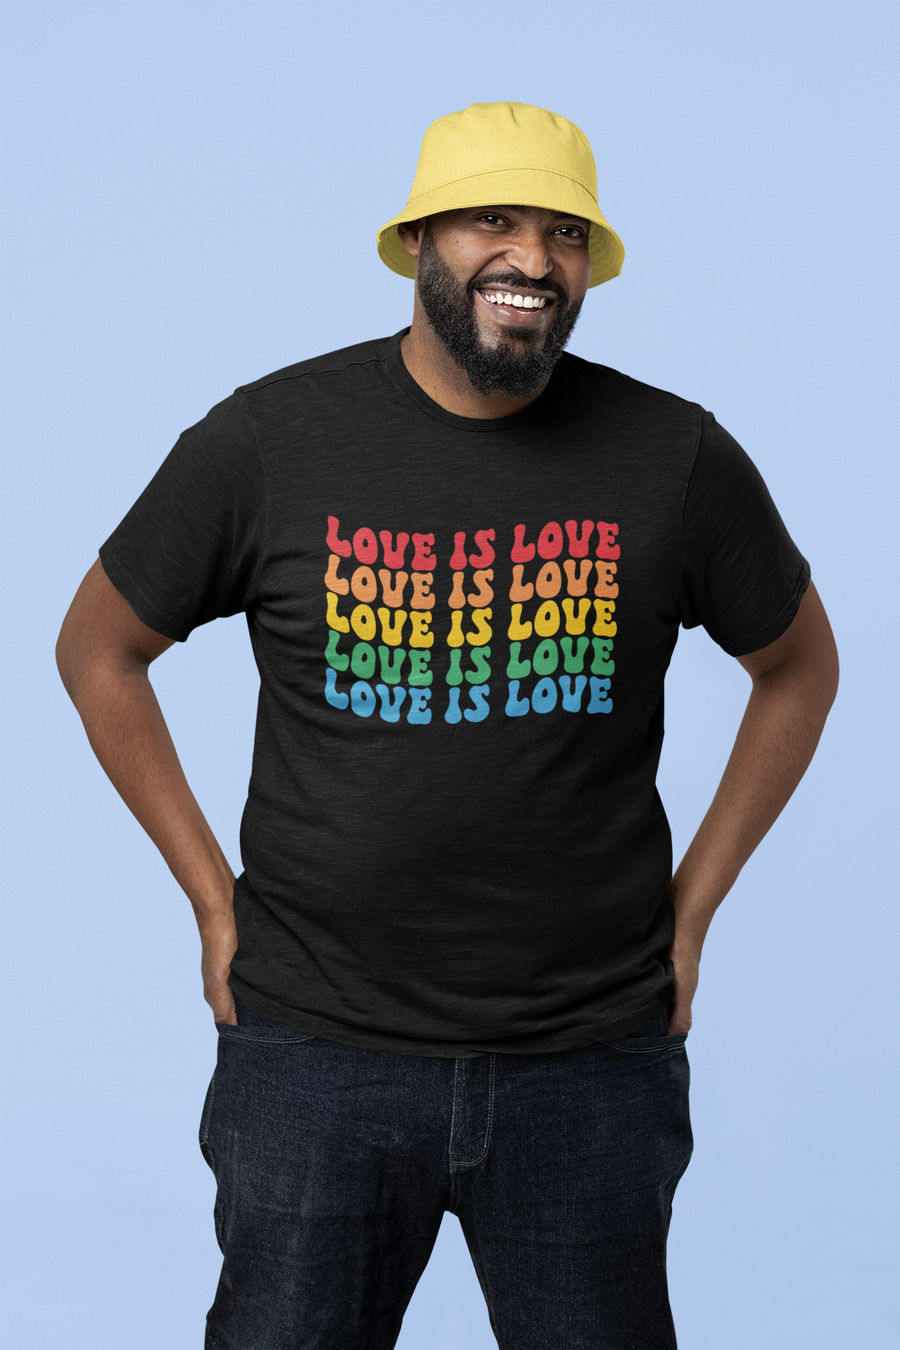 Love is Love Tee | Infant Sizes up to Adult 5X